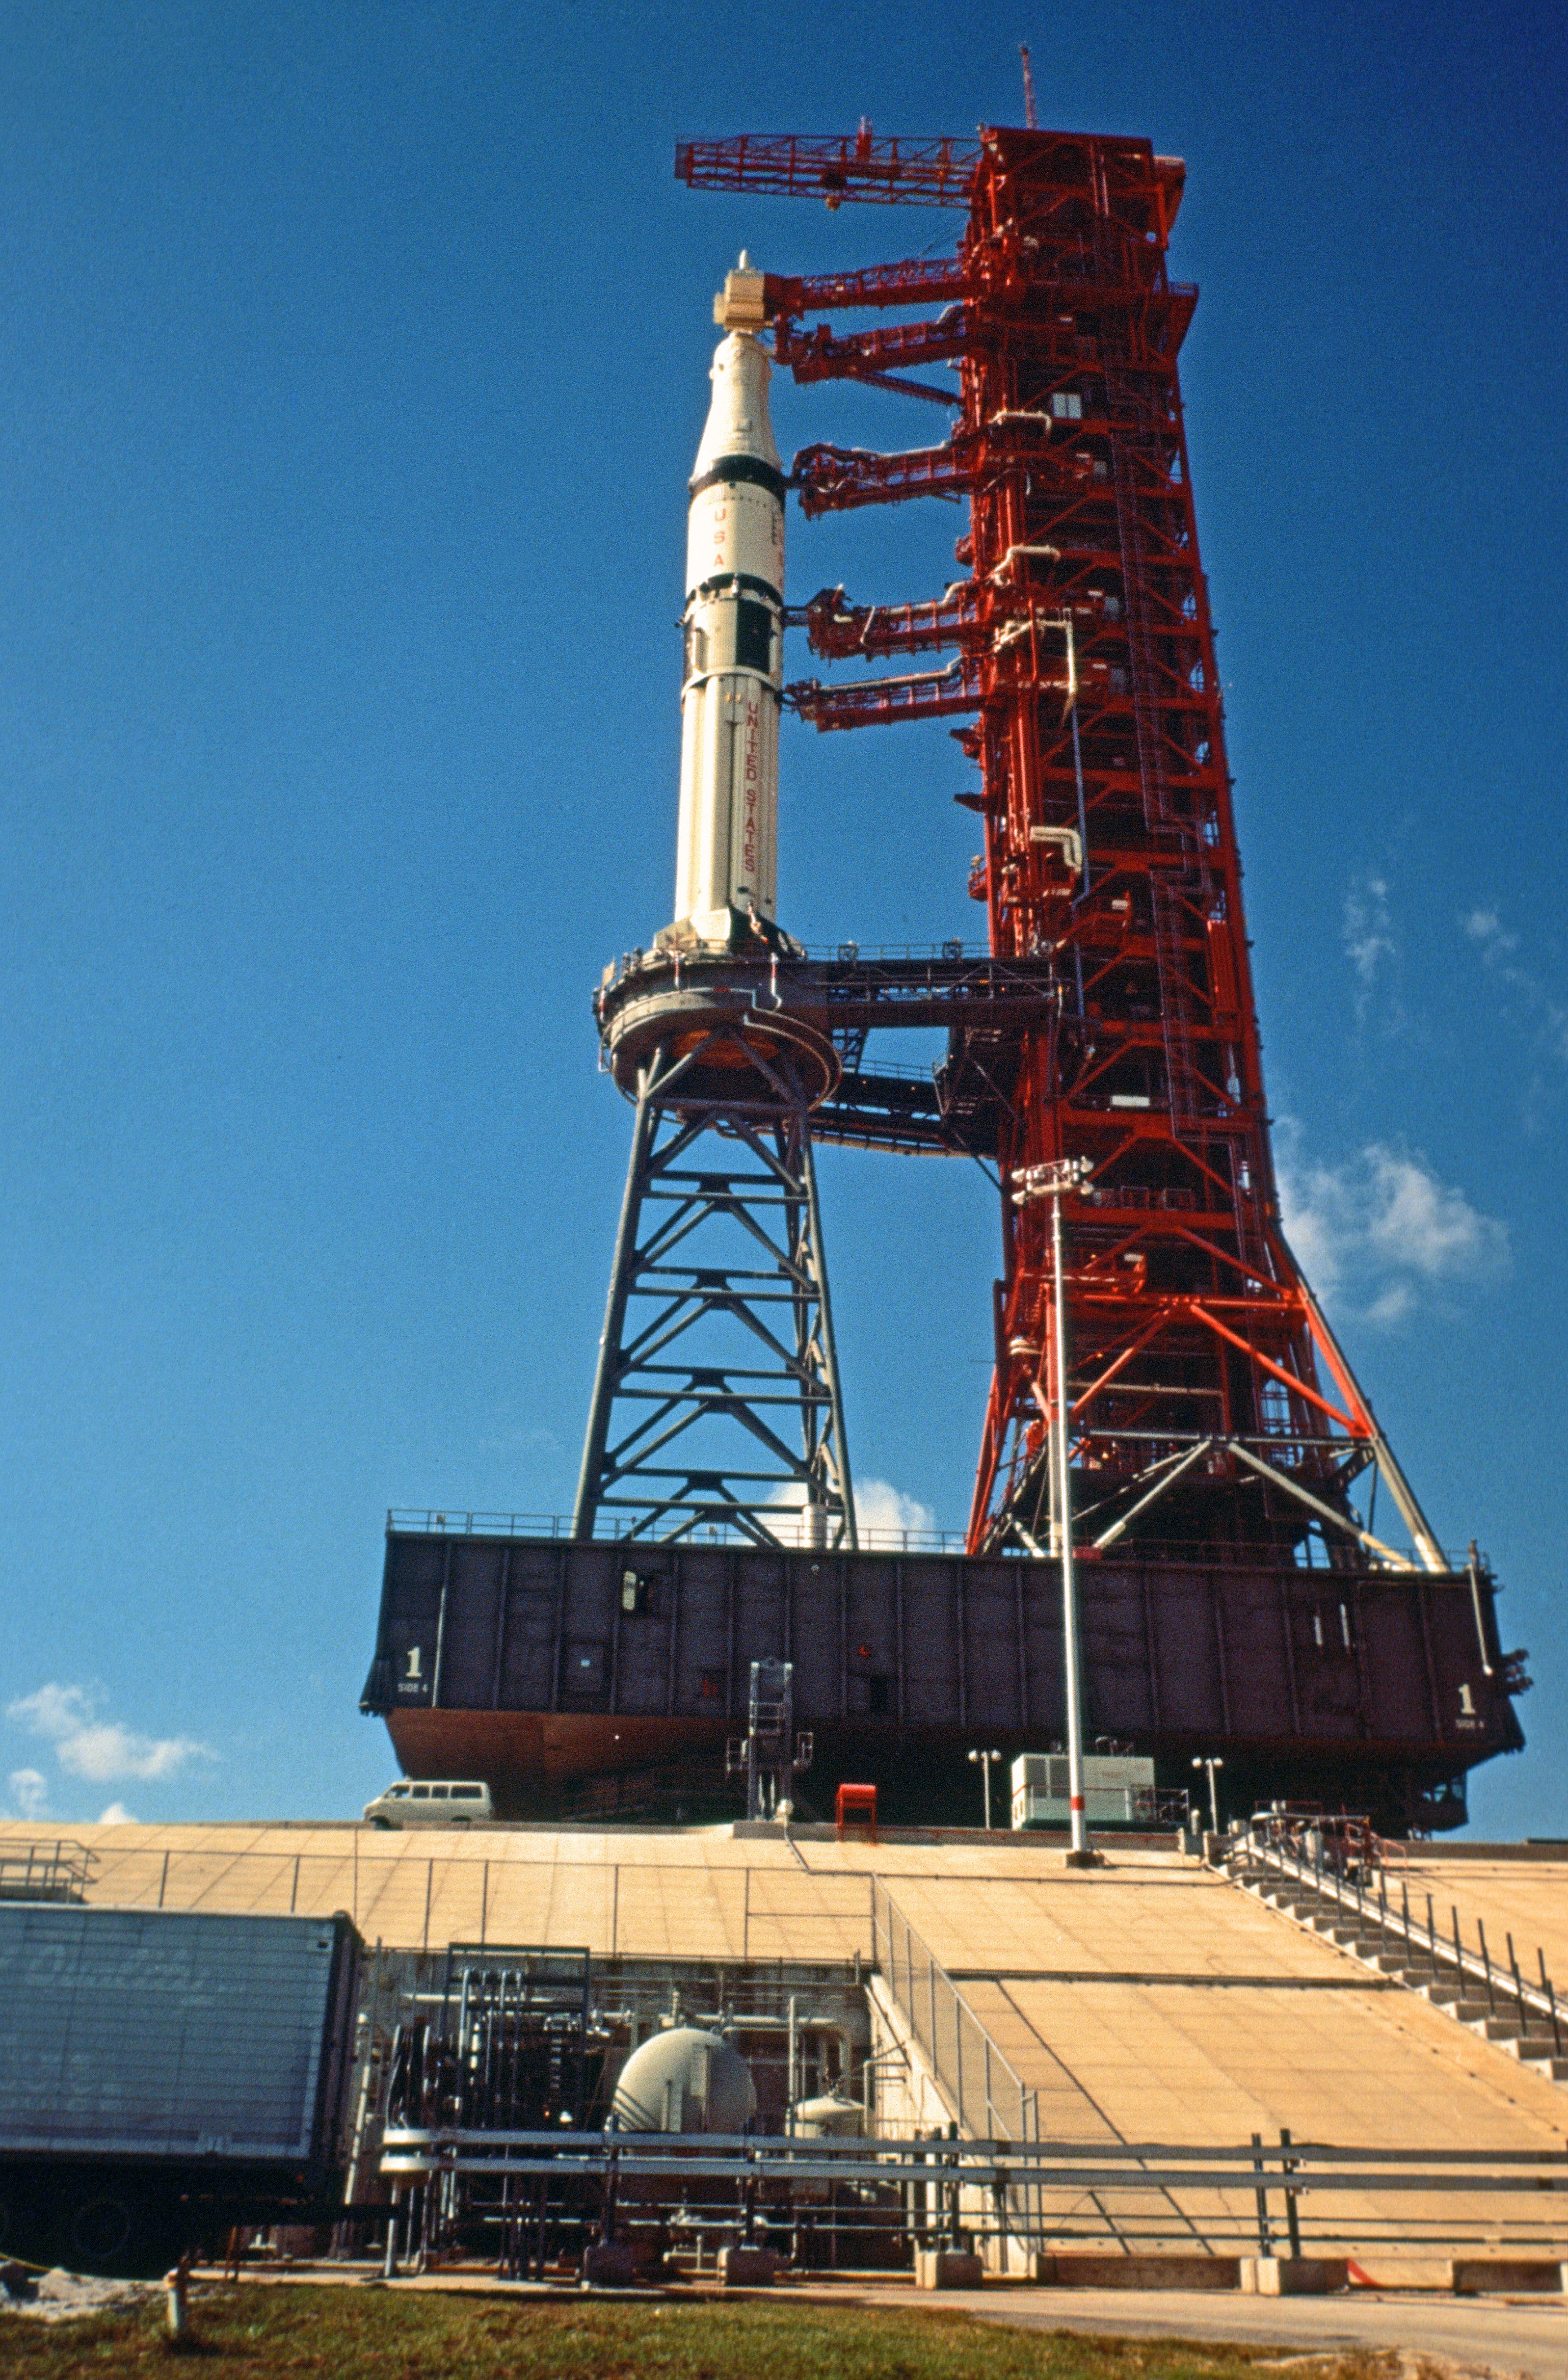 Image of the Skylab 4 rescue vehicle at Launch Pad 39B